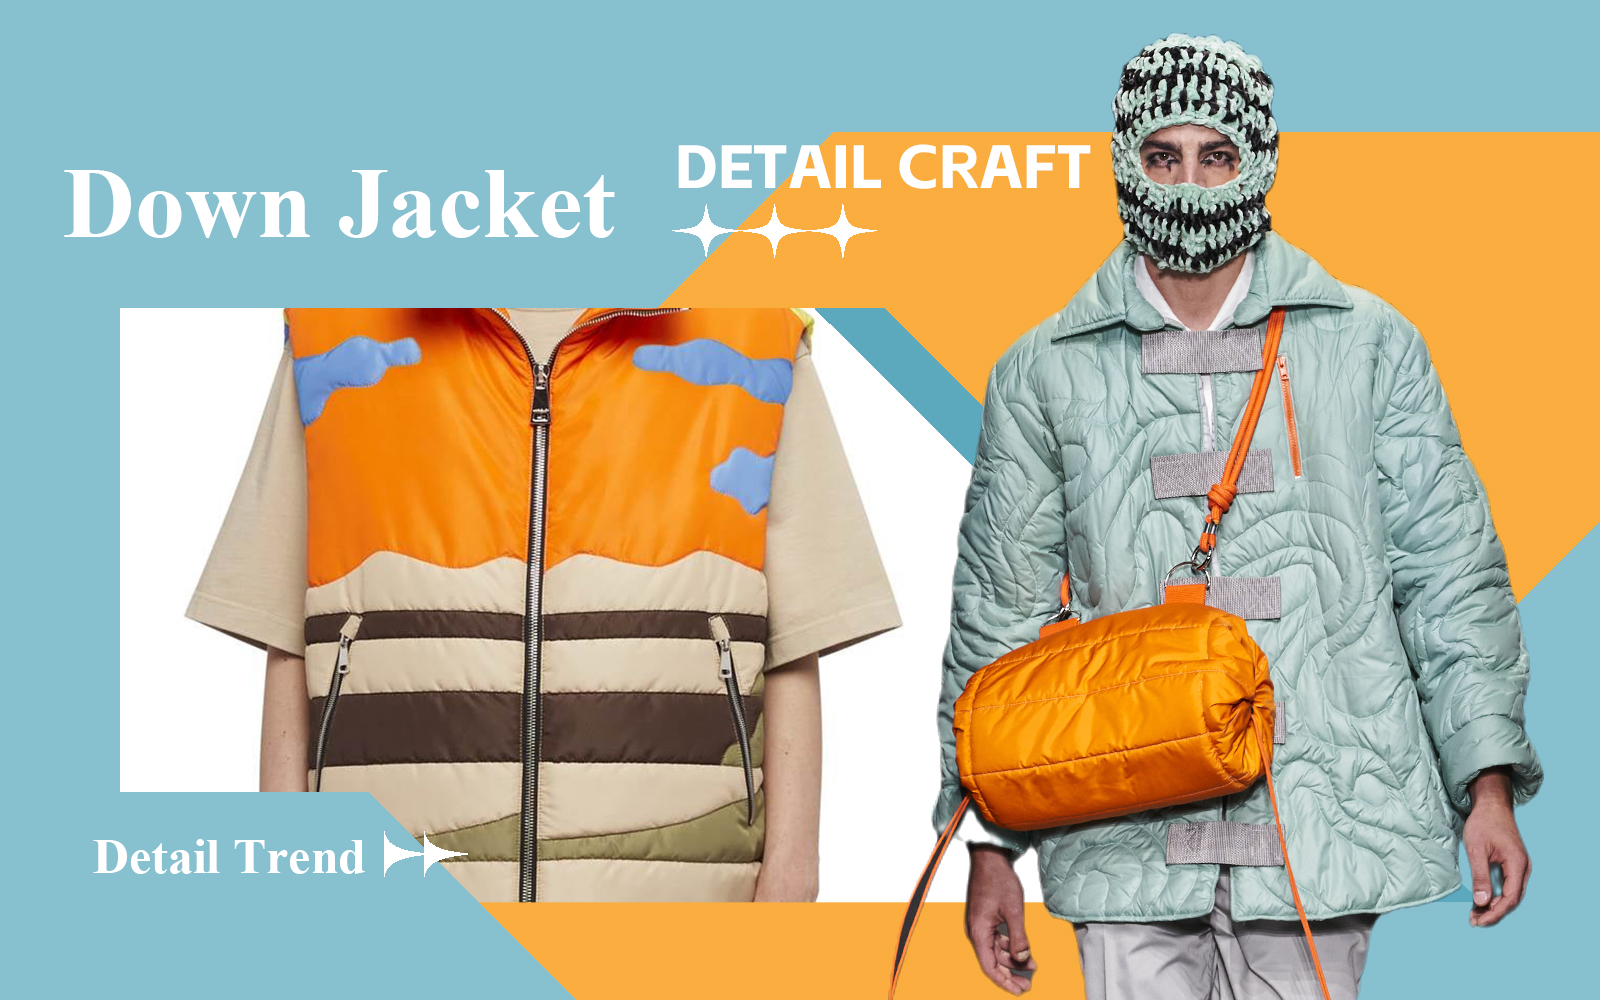 Diverse Quilting -- The Detail & Craft Trend for Men's Down Jacket